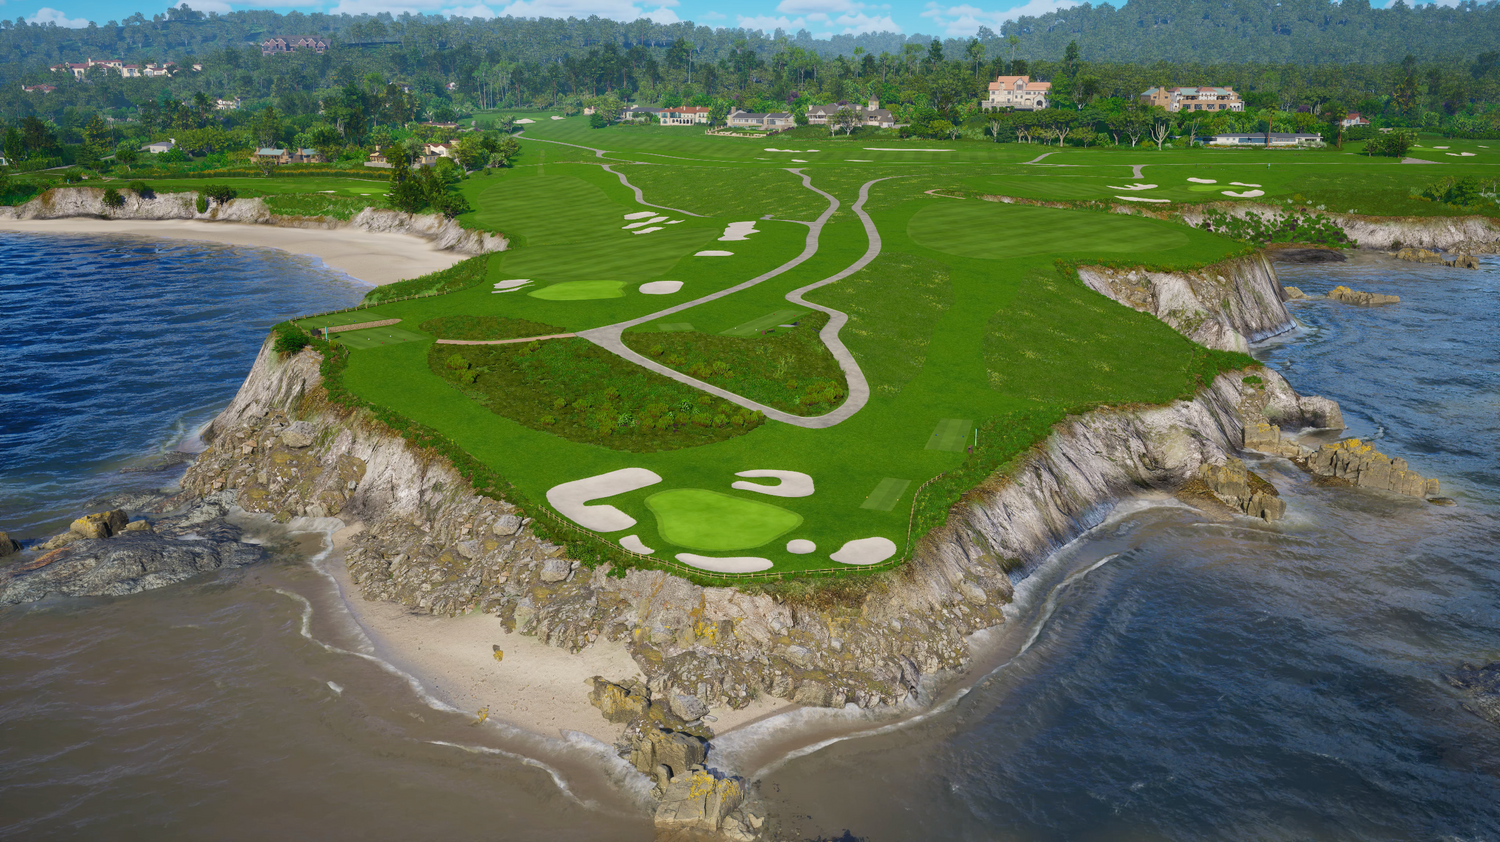 Golfing paradise at your fingertips